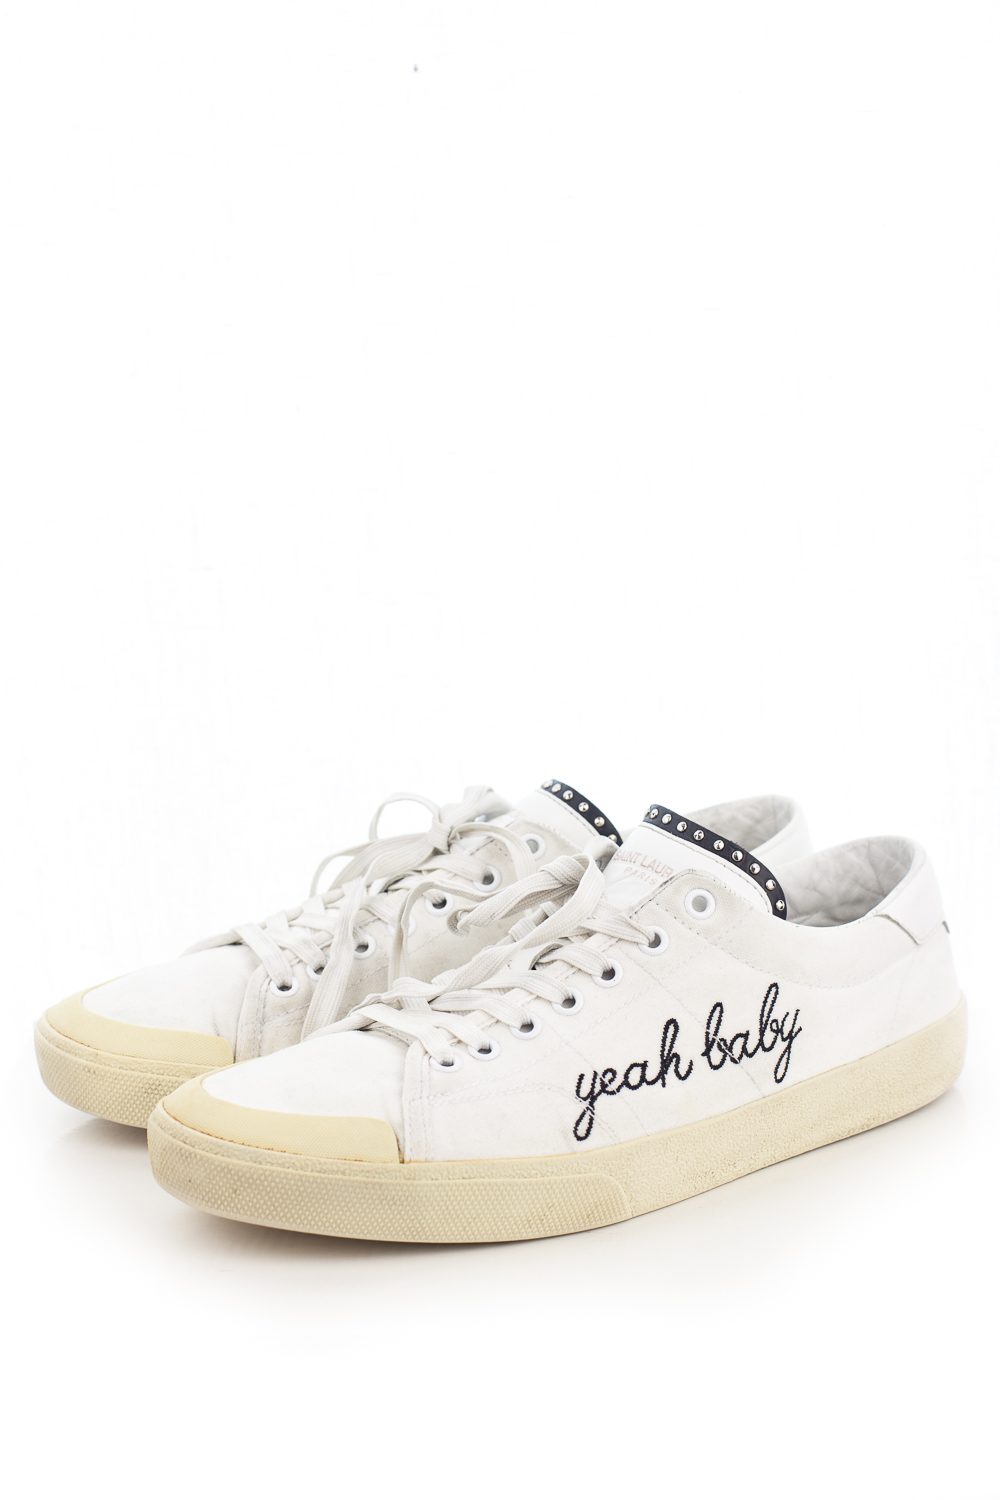 SL/37 SS16 “Yeah Baby” Court Low